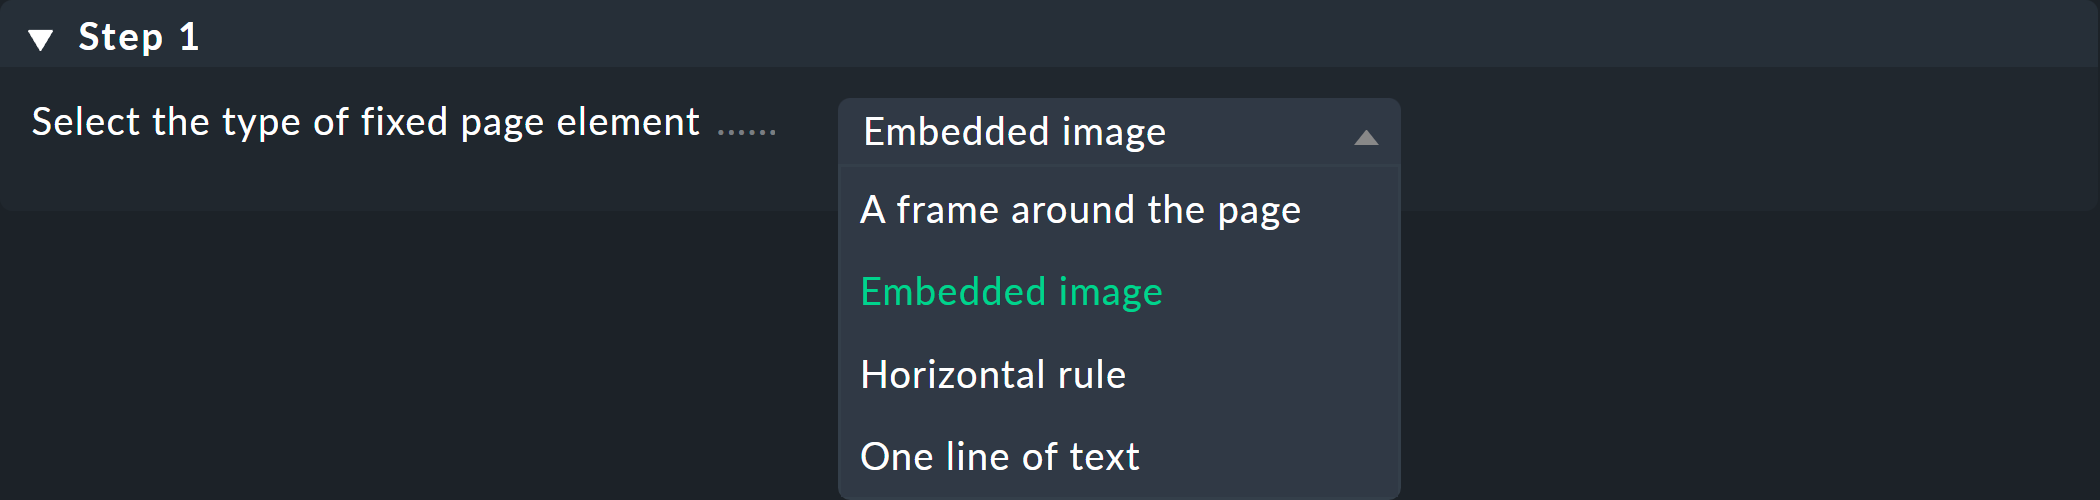 Dialog for selecting an image element.